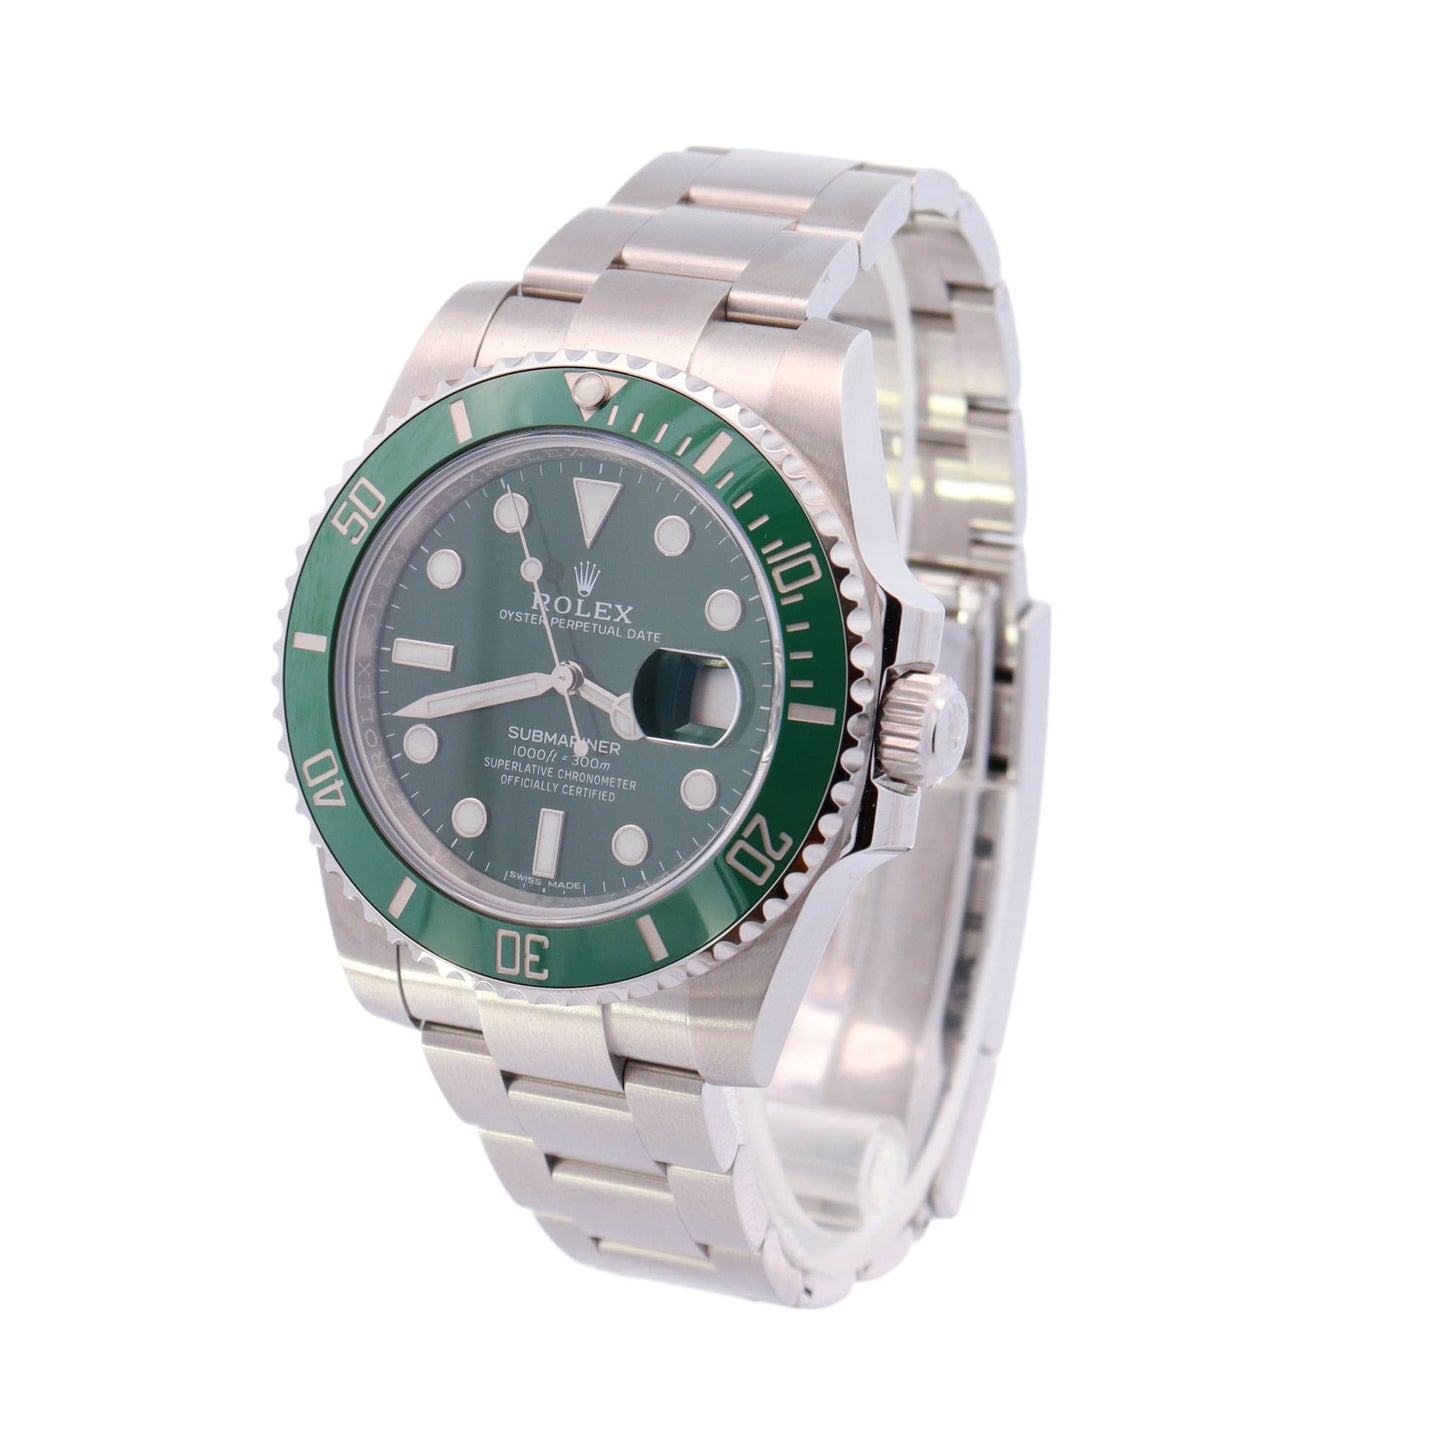 Rolex Submariner "Hulk" Stainless Steel 40mm Green Dot Dial Watch Reference #: 116610LV - Happy Jewelers Fine Jewelry Lifetime Warranty